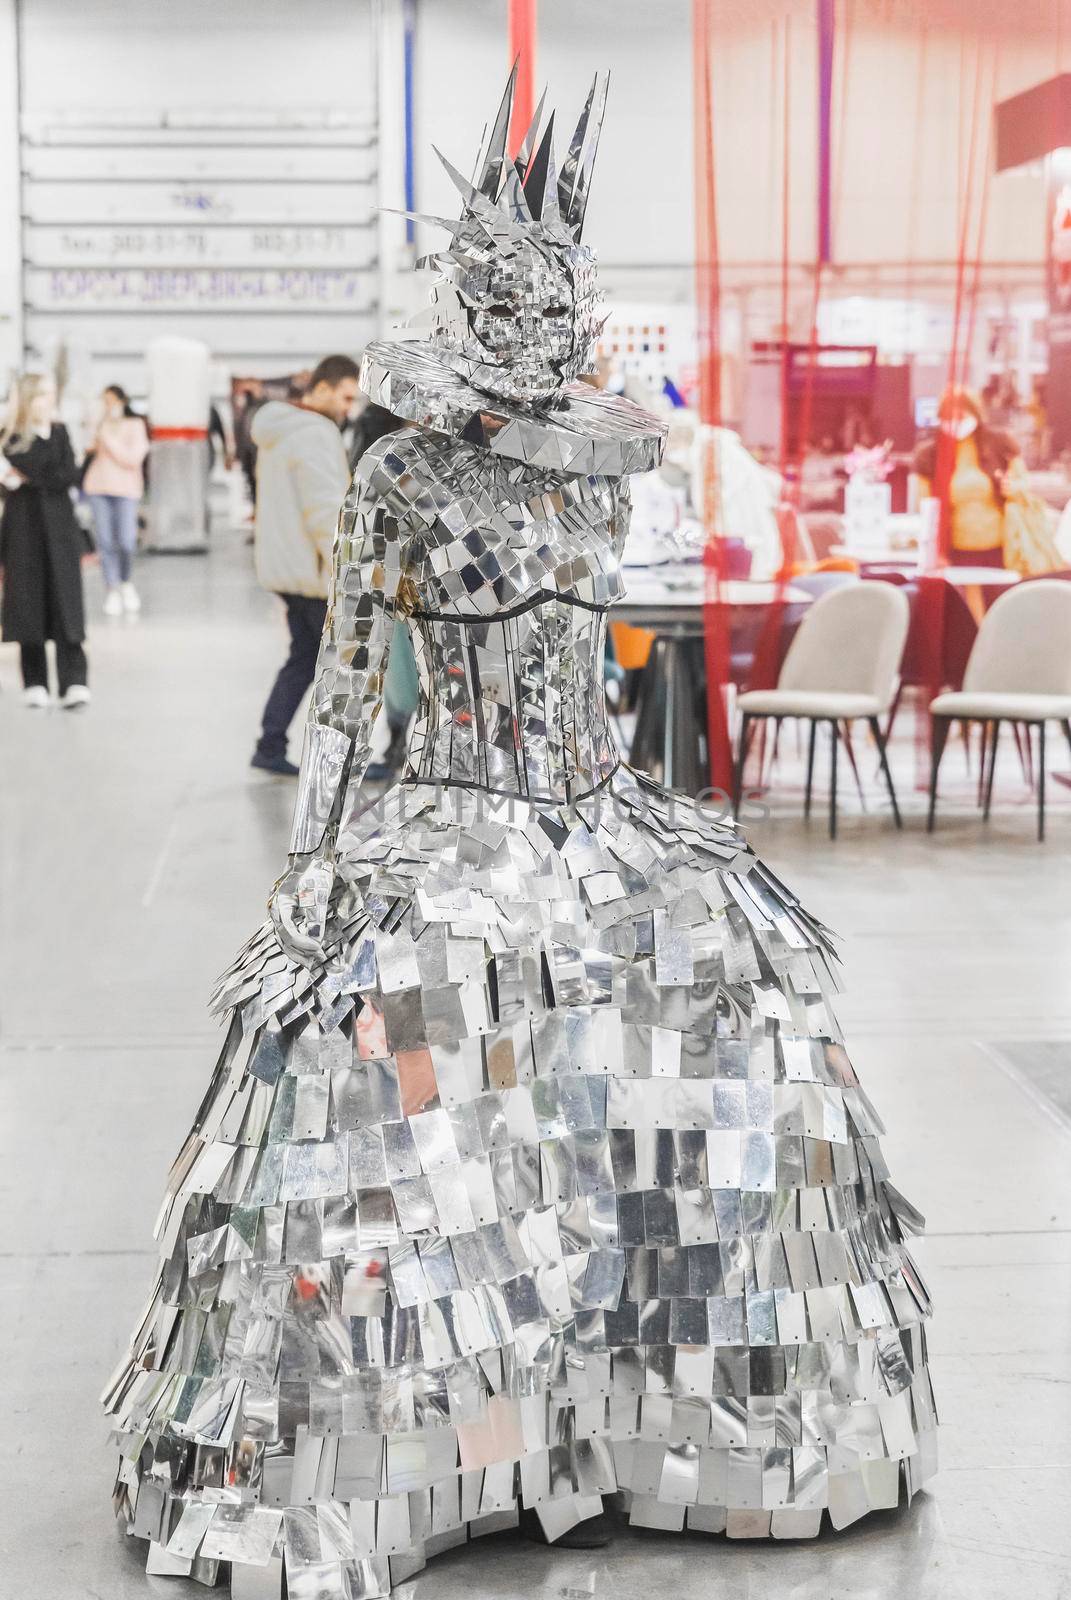 Kiev, Ukraine, October 2020: girl in a queen costume made of polished pieces of metal at the international furniture exhibition